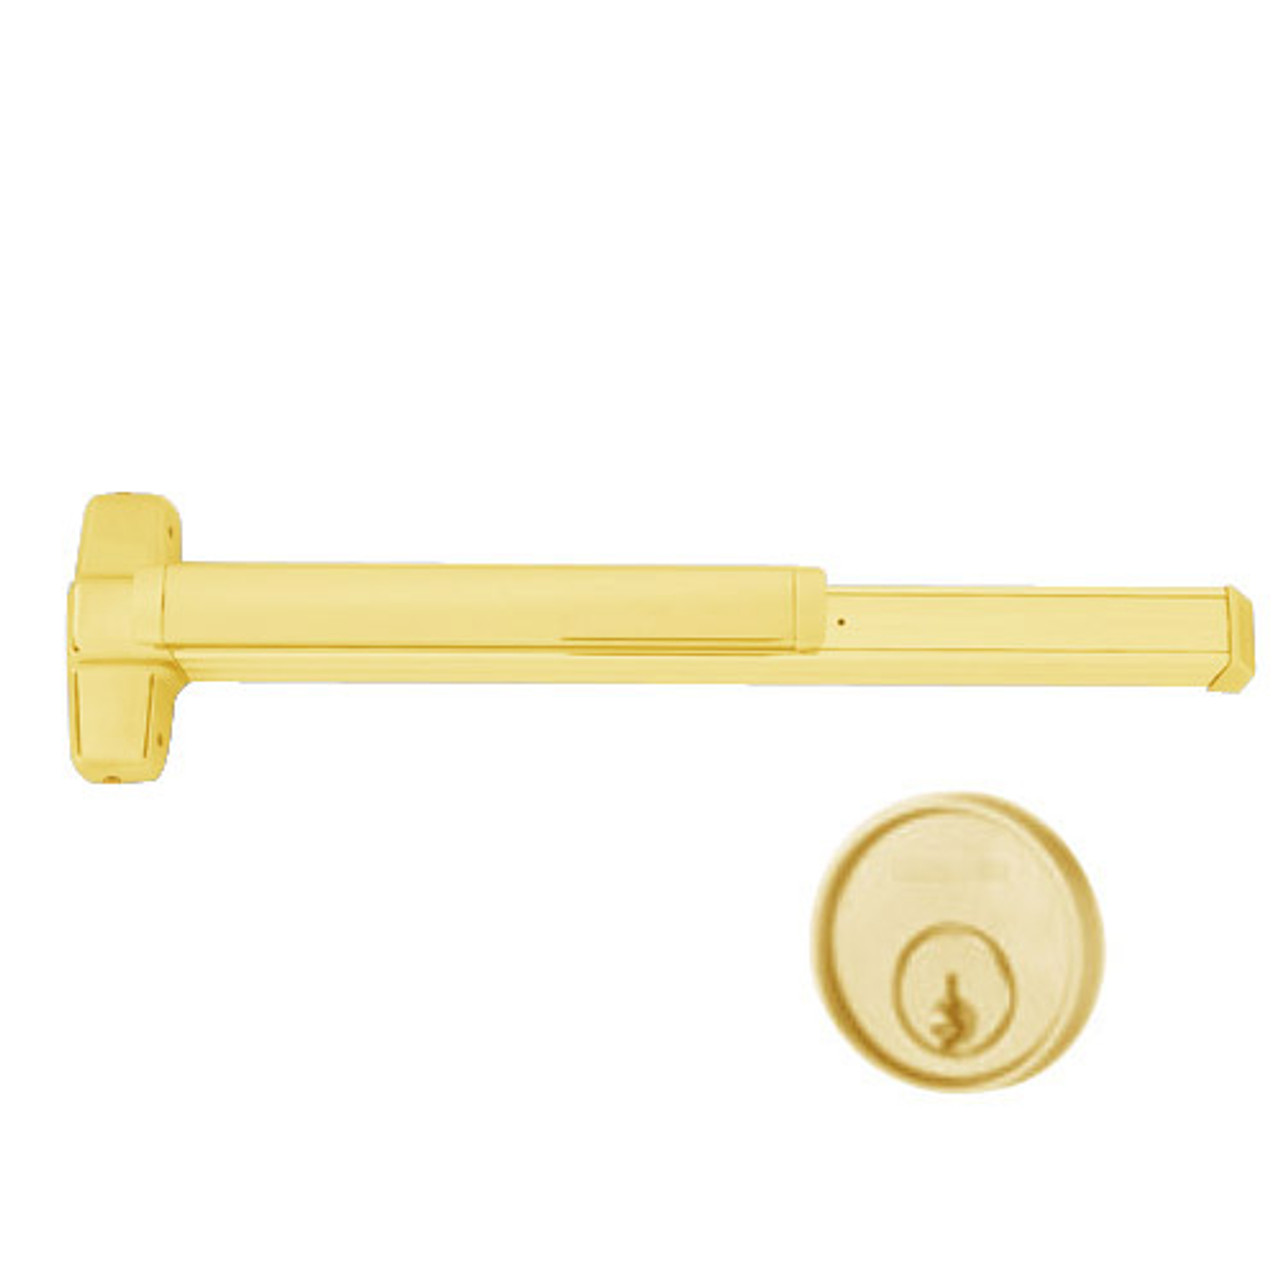 QEL9847WDC-NL-OP-US3-4 Von Duprin Exit Device with Quiet Electric Latch in Bright Brass